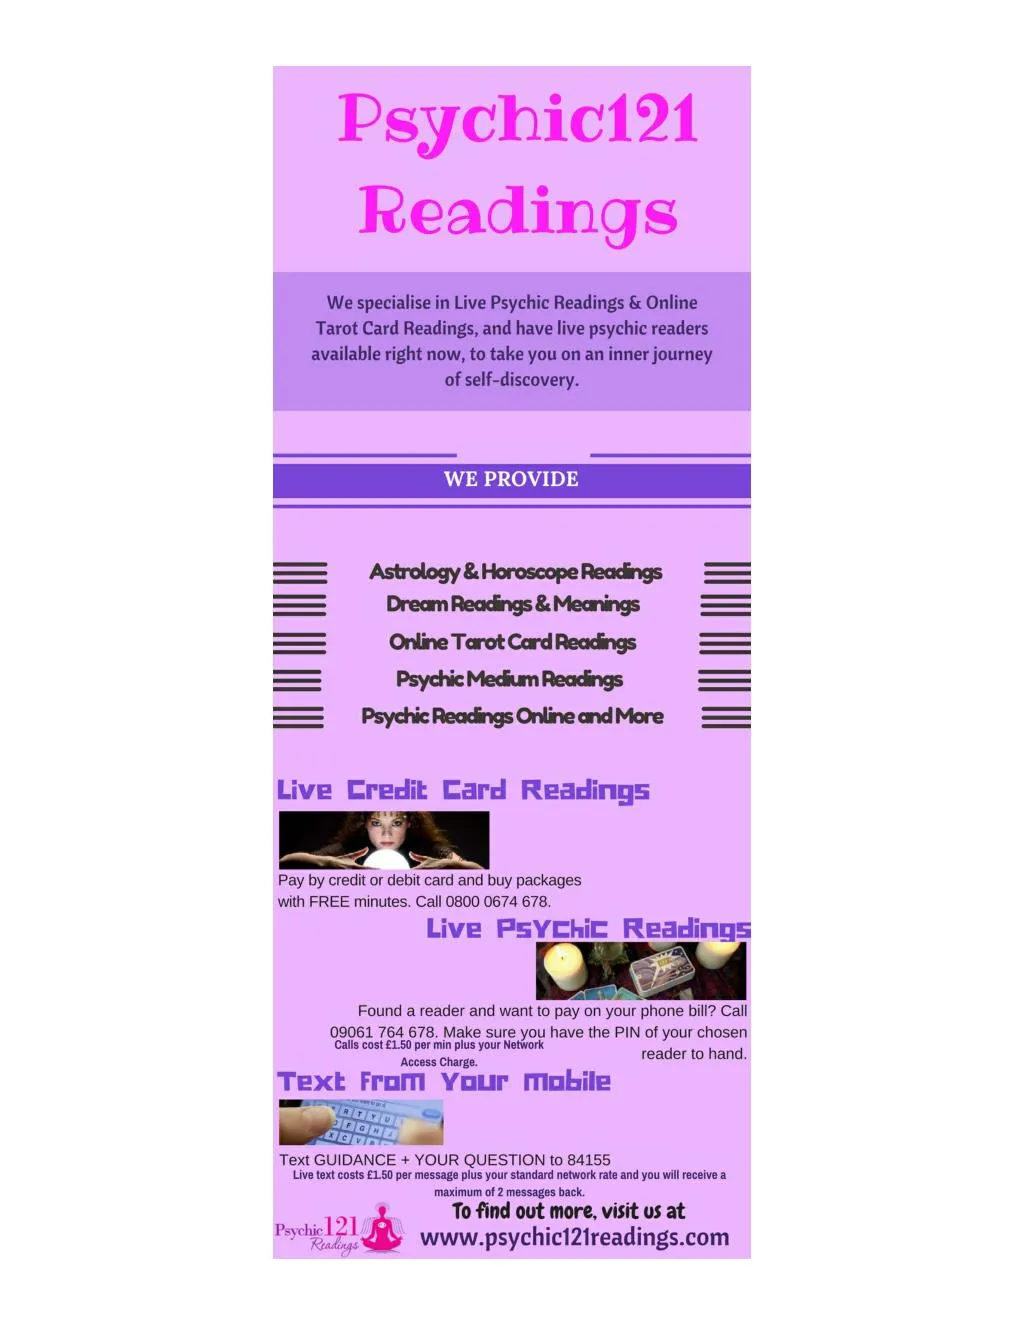 free psychic reading without credit card